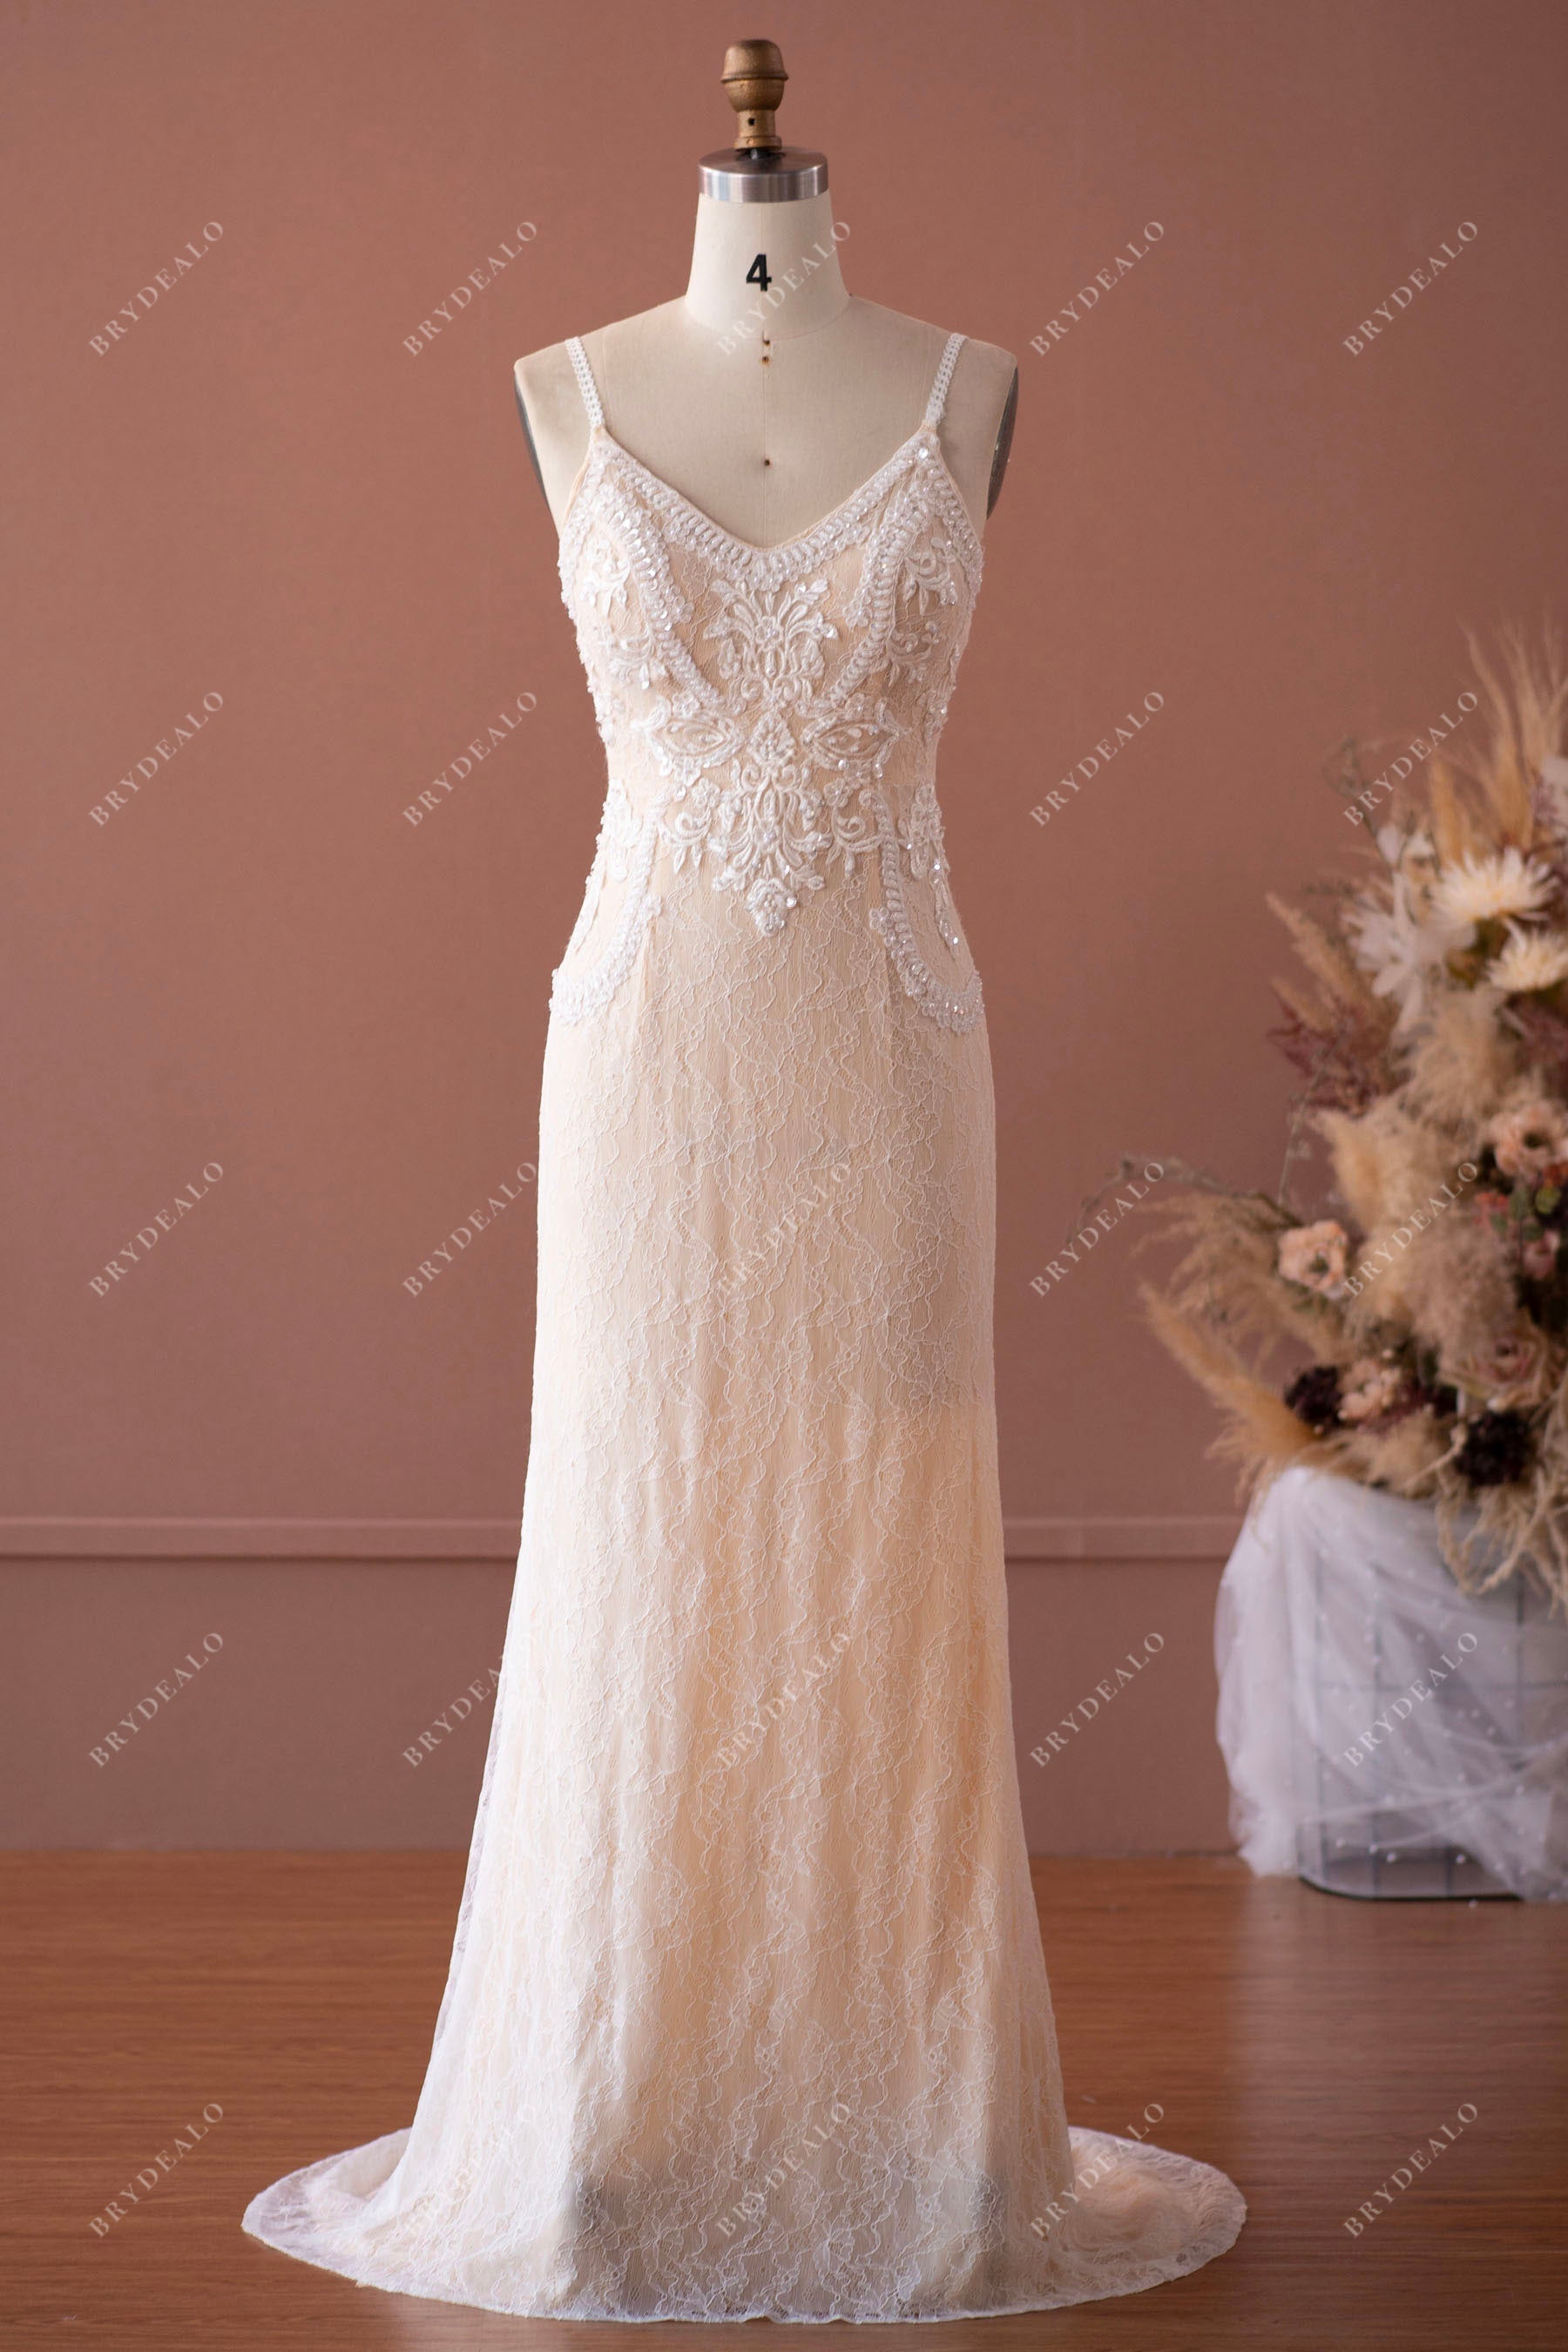 Boho Colored Flower Lace Fit Flare Wedding Dress